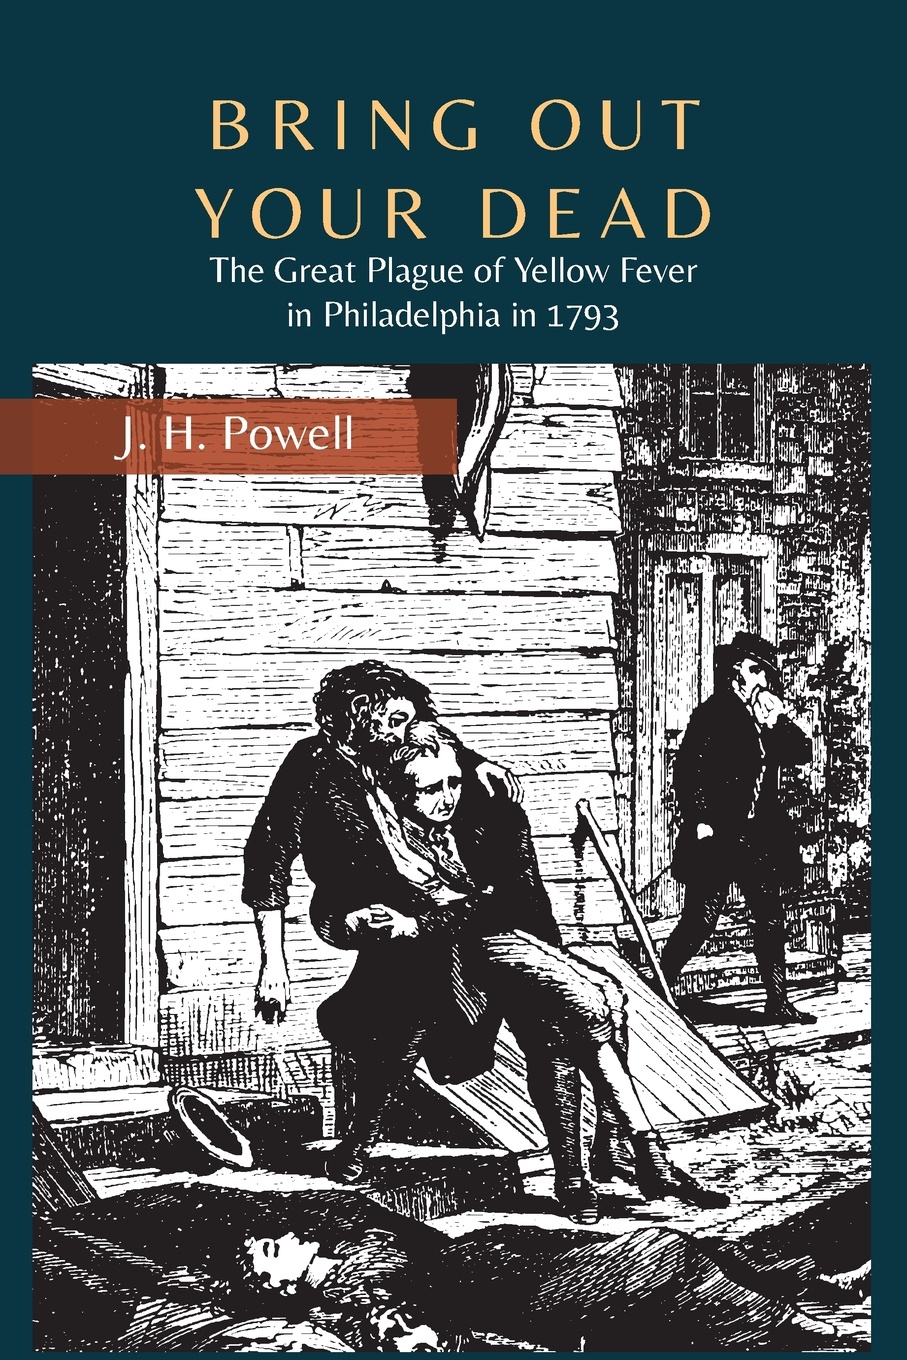 Bring Out Your Dead. The Great Plague of Yellow Fever in Philadelphia in 1793